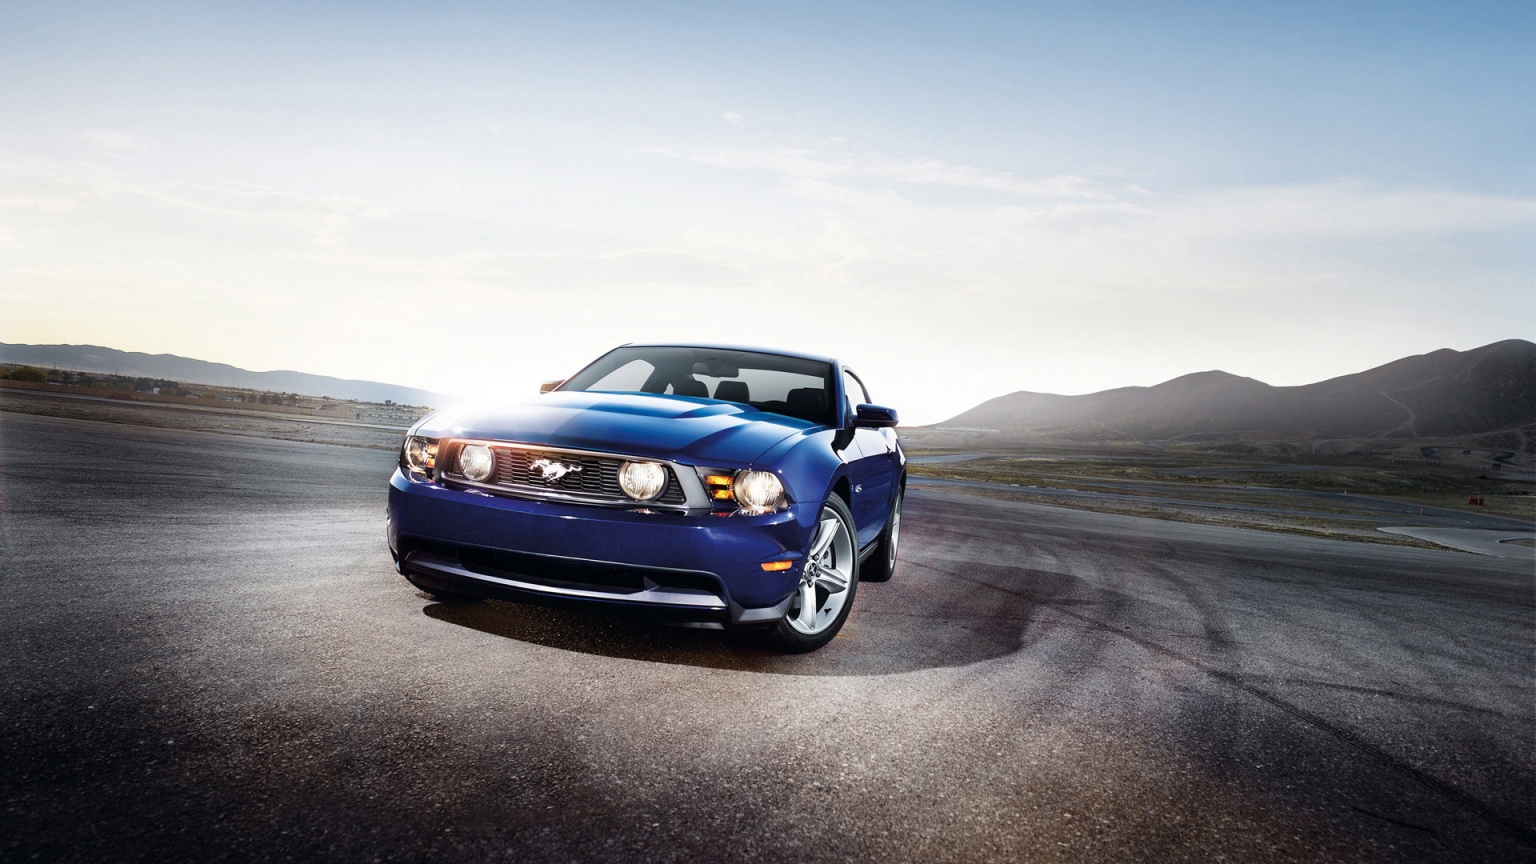 Ford Mustang GT Blue 2012 for 1536 x 864 HDTV resolution